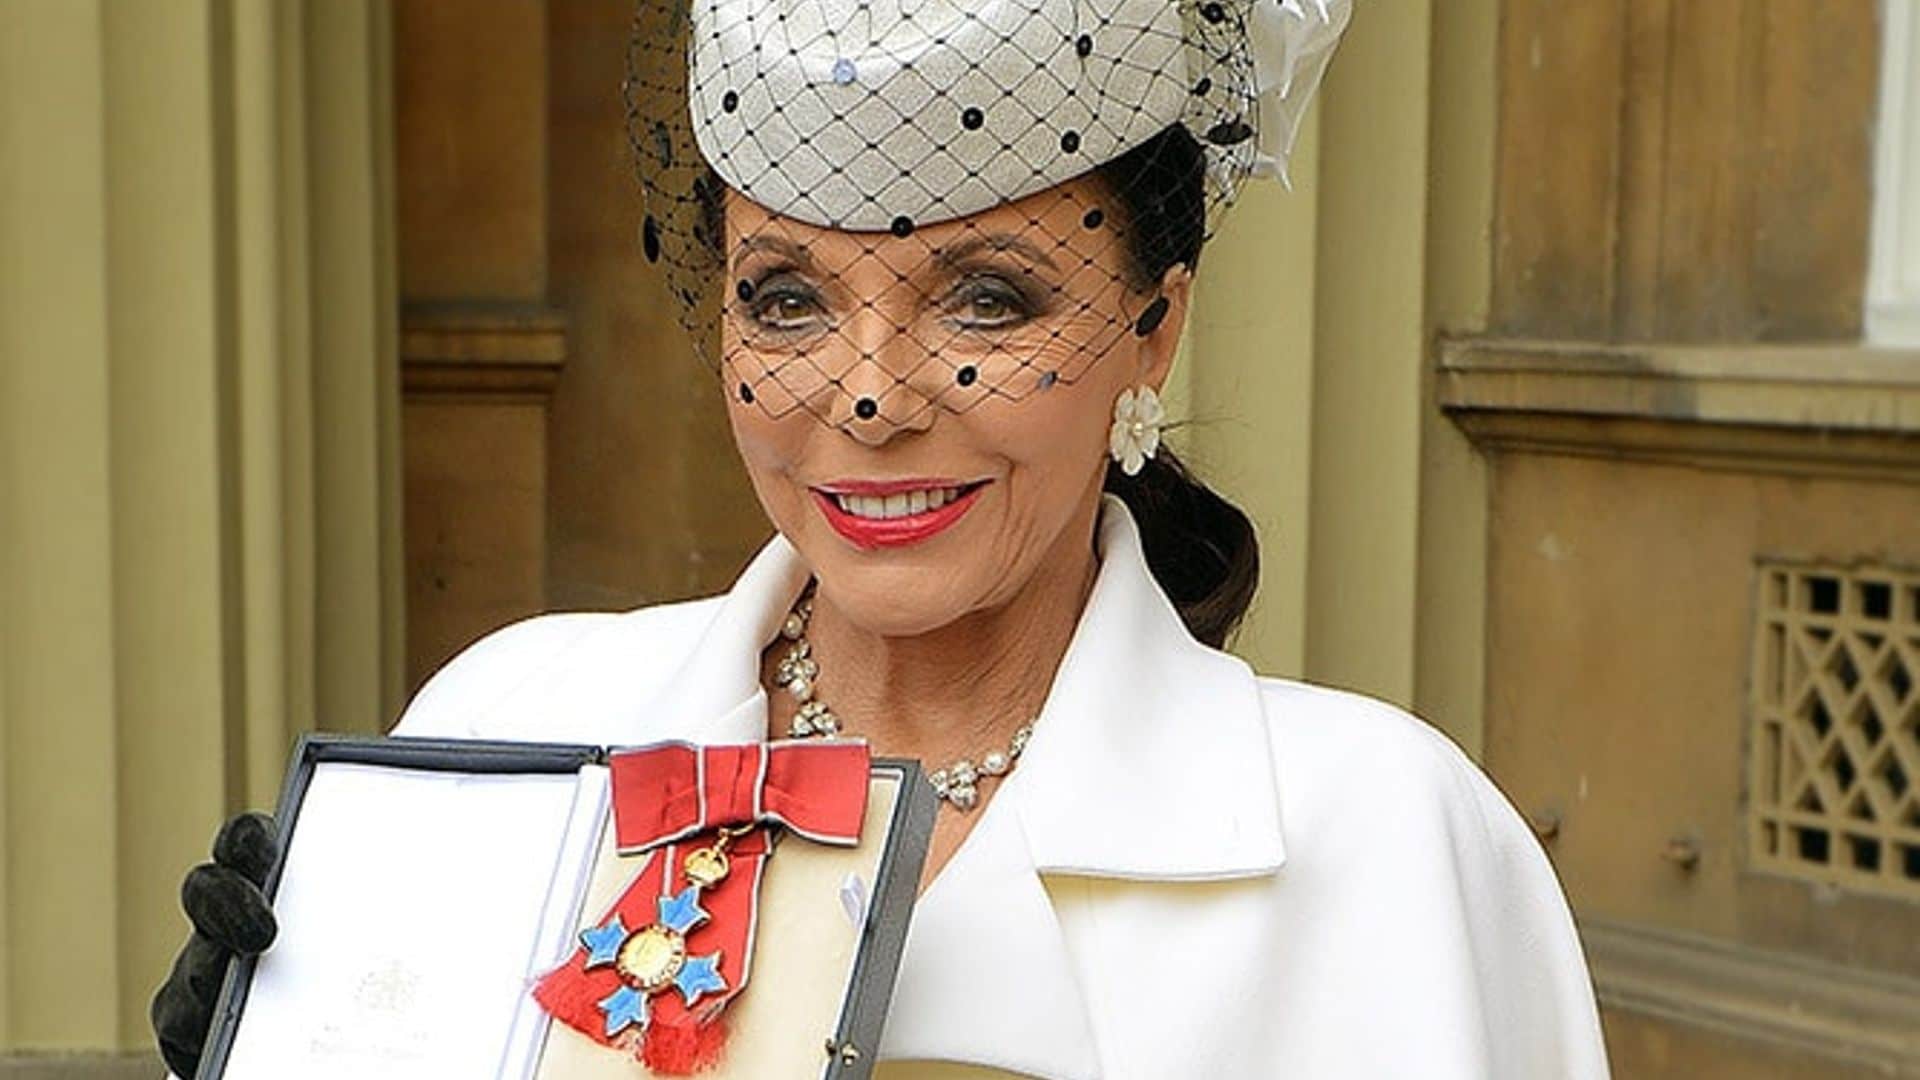 Joan Collins made dame by Prince Charles at Buckingham Palace